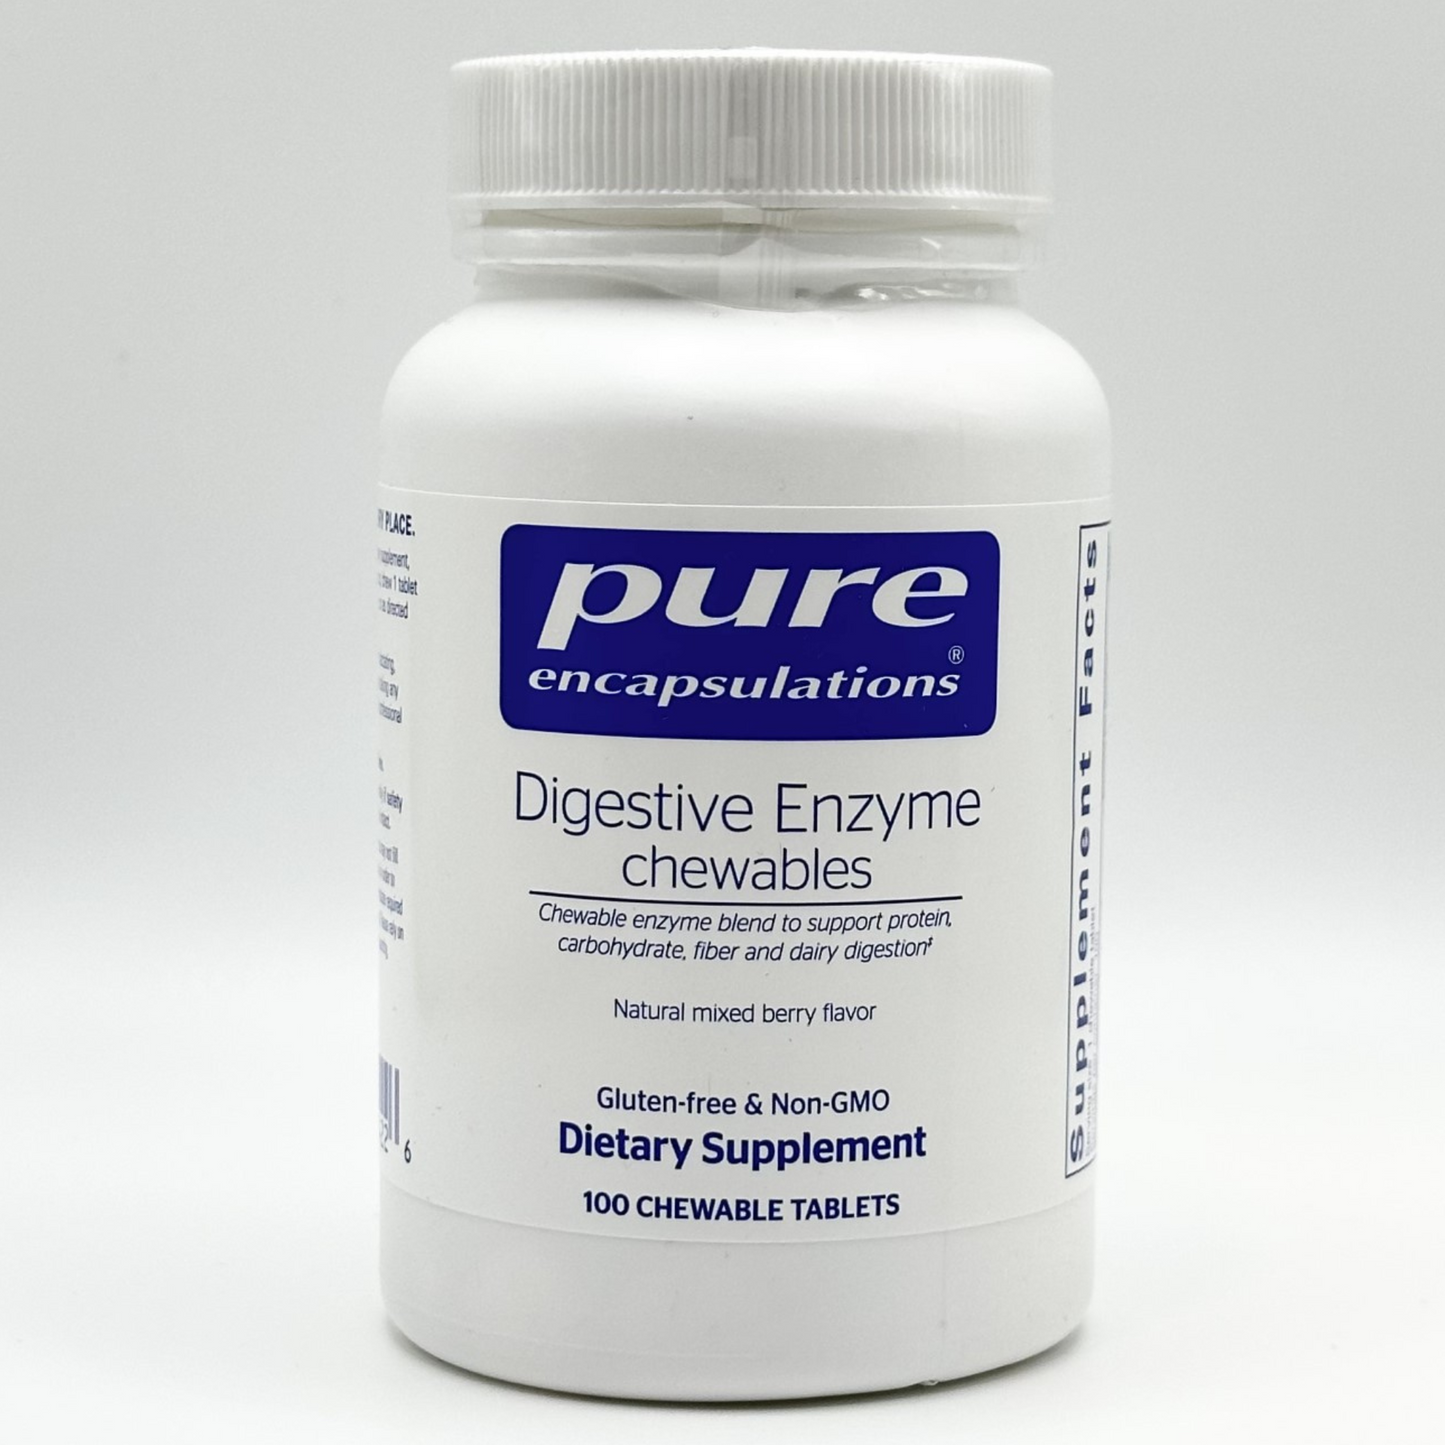 (Digestive Enzyme chewables) 100ct